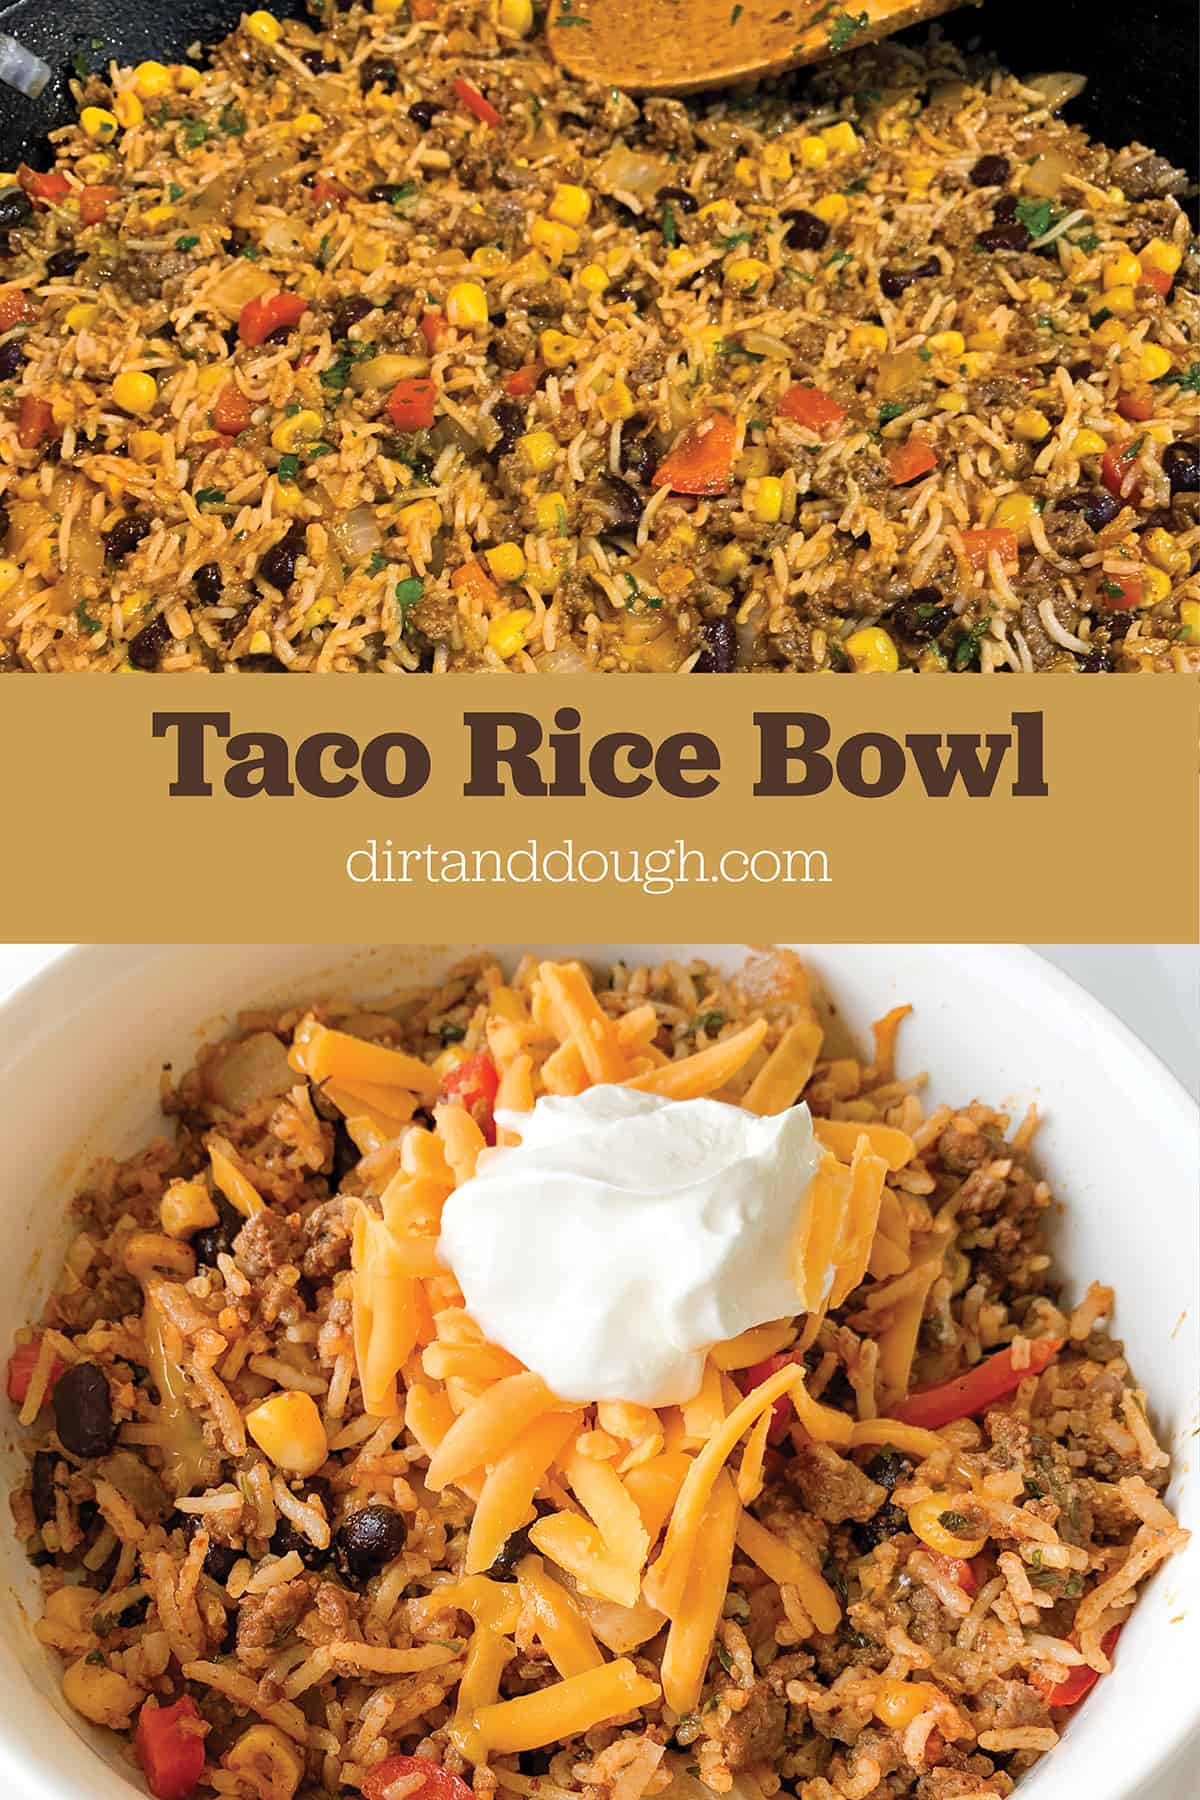 Taco Rice Bowl - Dirt and Dough Made From Scratch Recipes